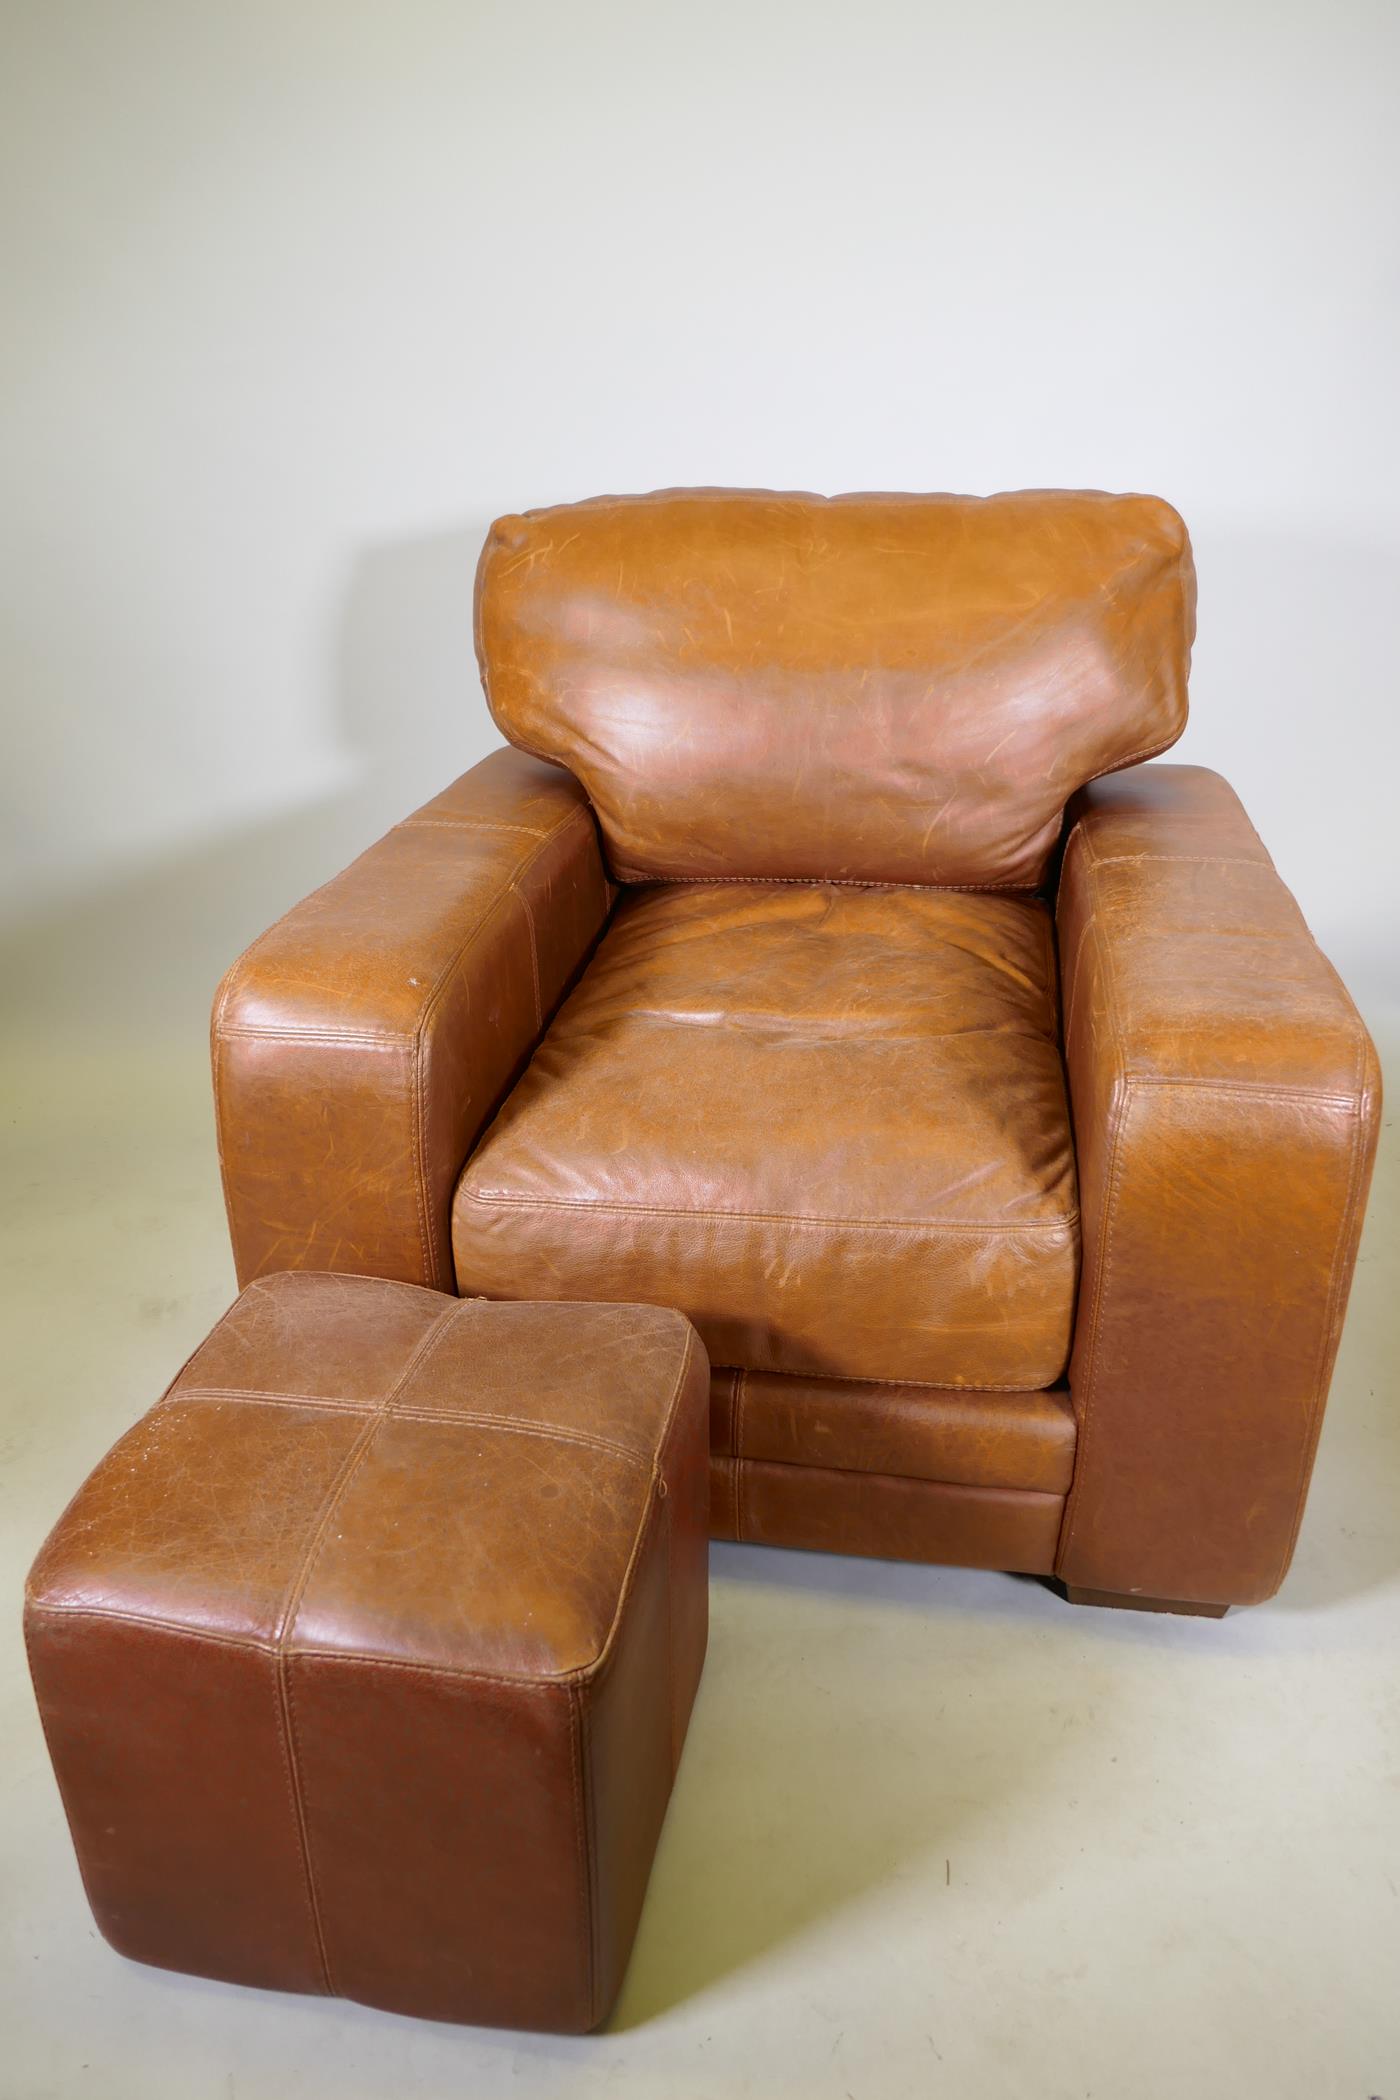 A contemporary leather armchair and matching pouffe, 40" x 40" x 36" high